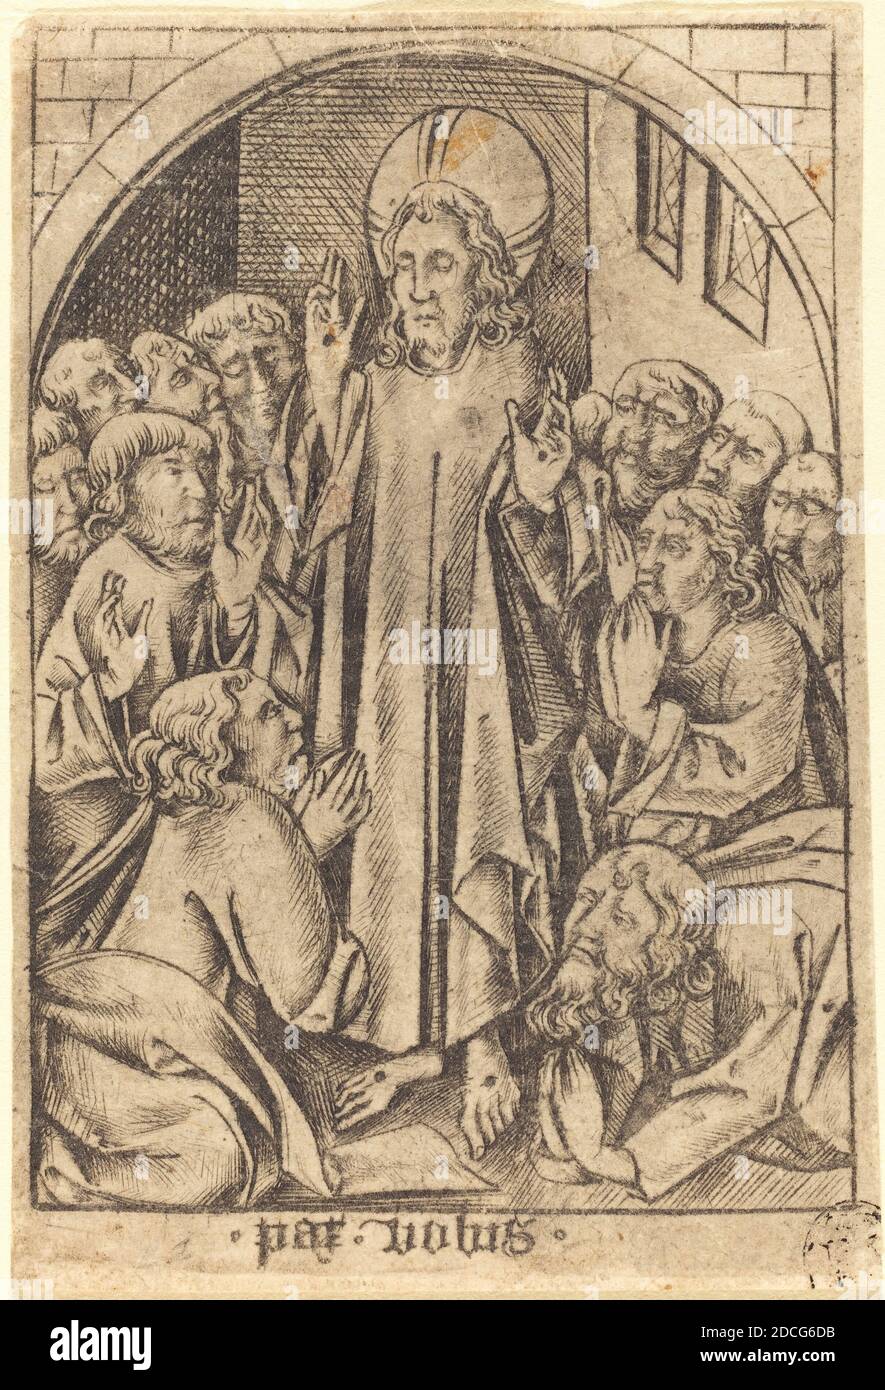 Israhel van Meckenem, (artist), German, c. 1445 - 1503, Master of the Martyrdom of the Ten Thousand, (artist after), Christ Appearing to the Disciples, c. 1465, engraving Stock Photo